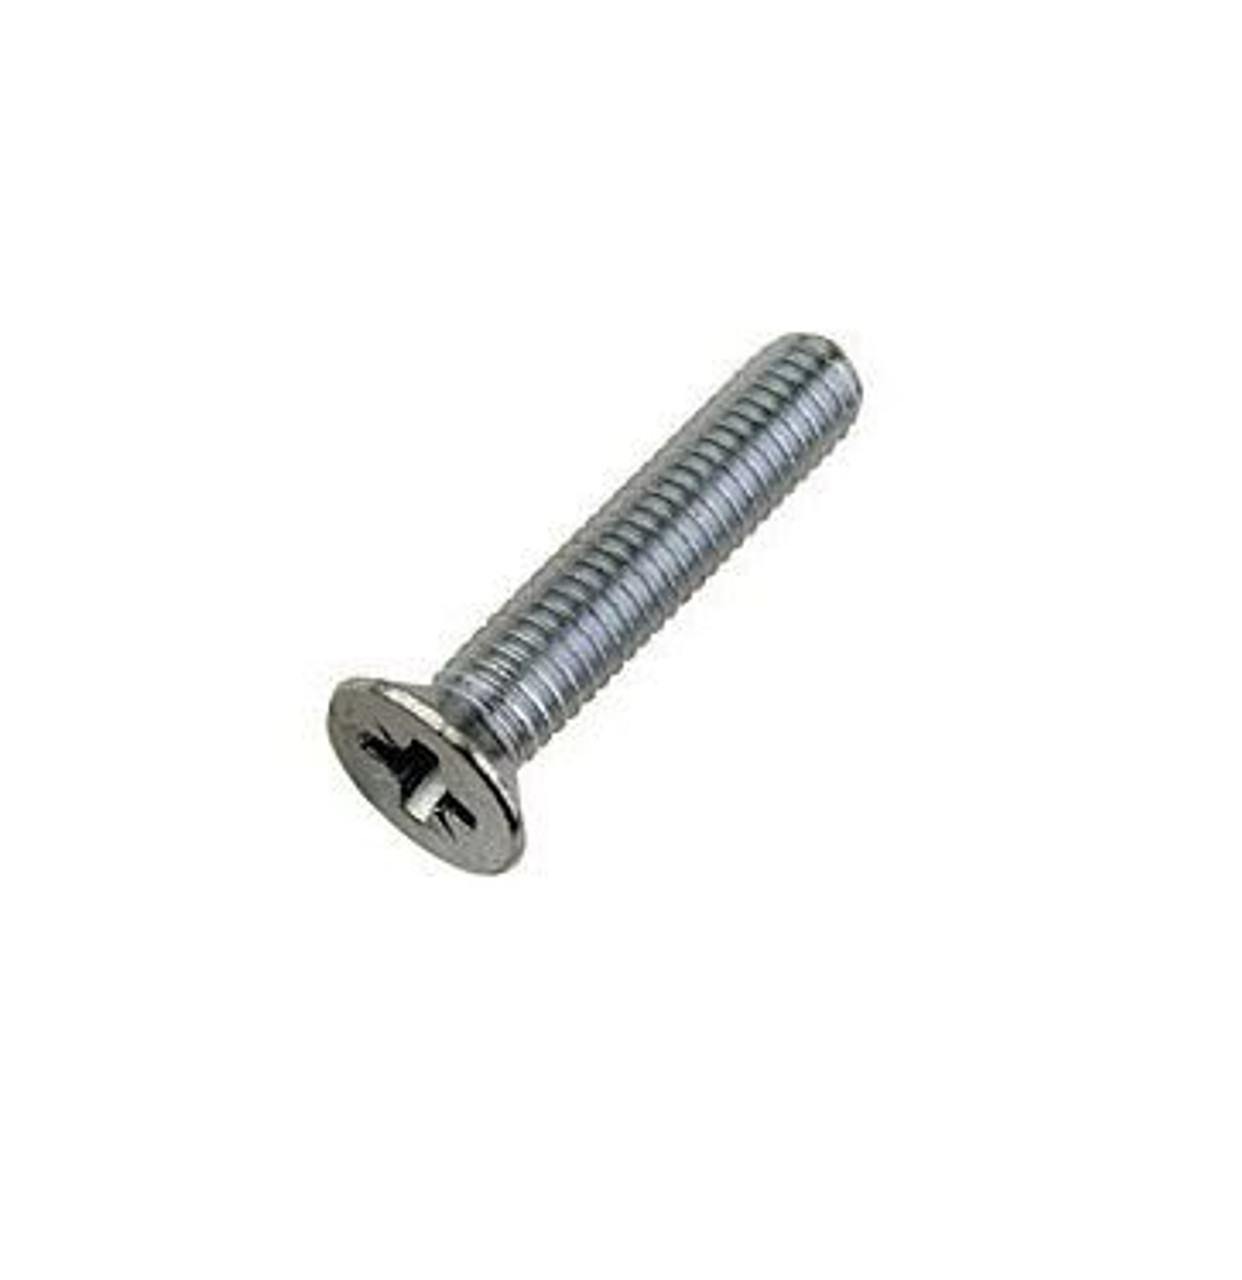 4mm Countersunk Machine Screws/Bolts M4 x 10mm (Including Head) A2 Stainless Steel Pozi Csk Head Mch Screw (20 Pack)